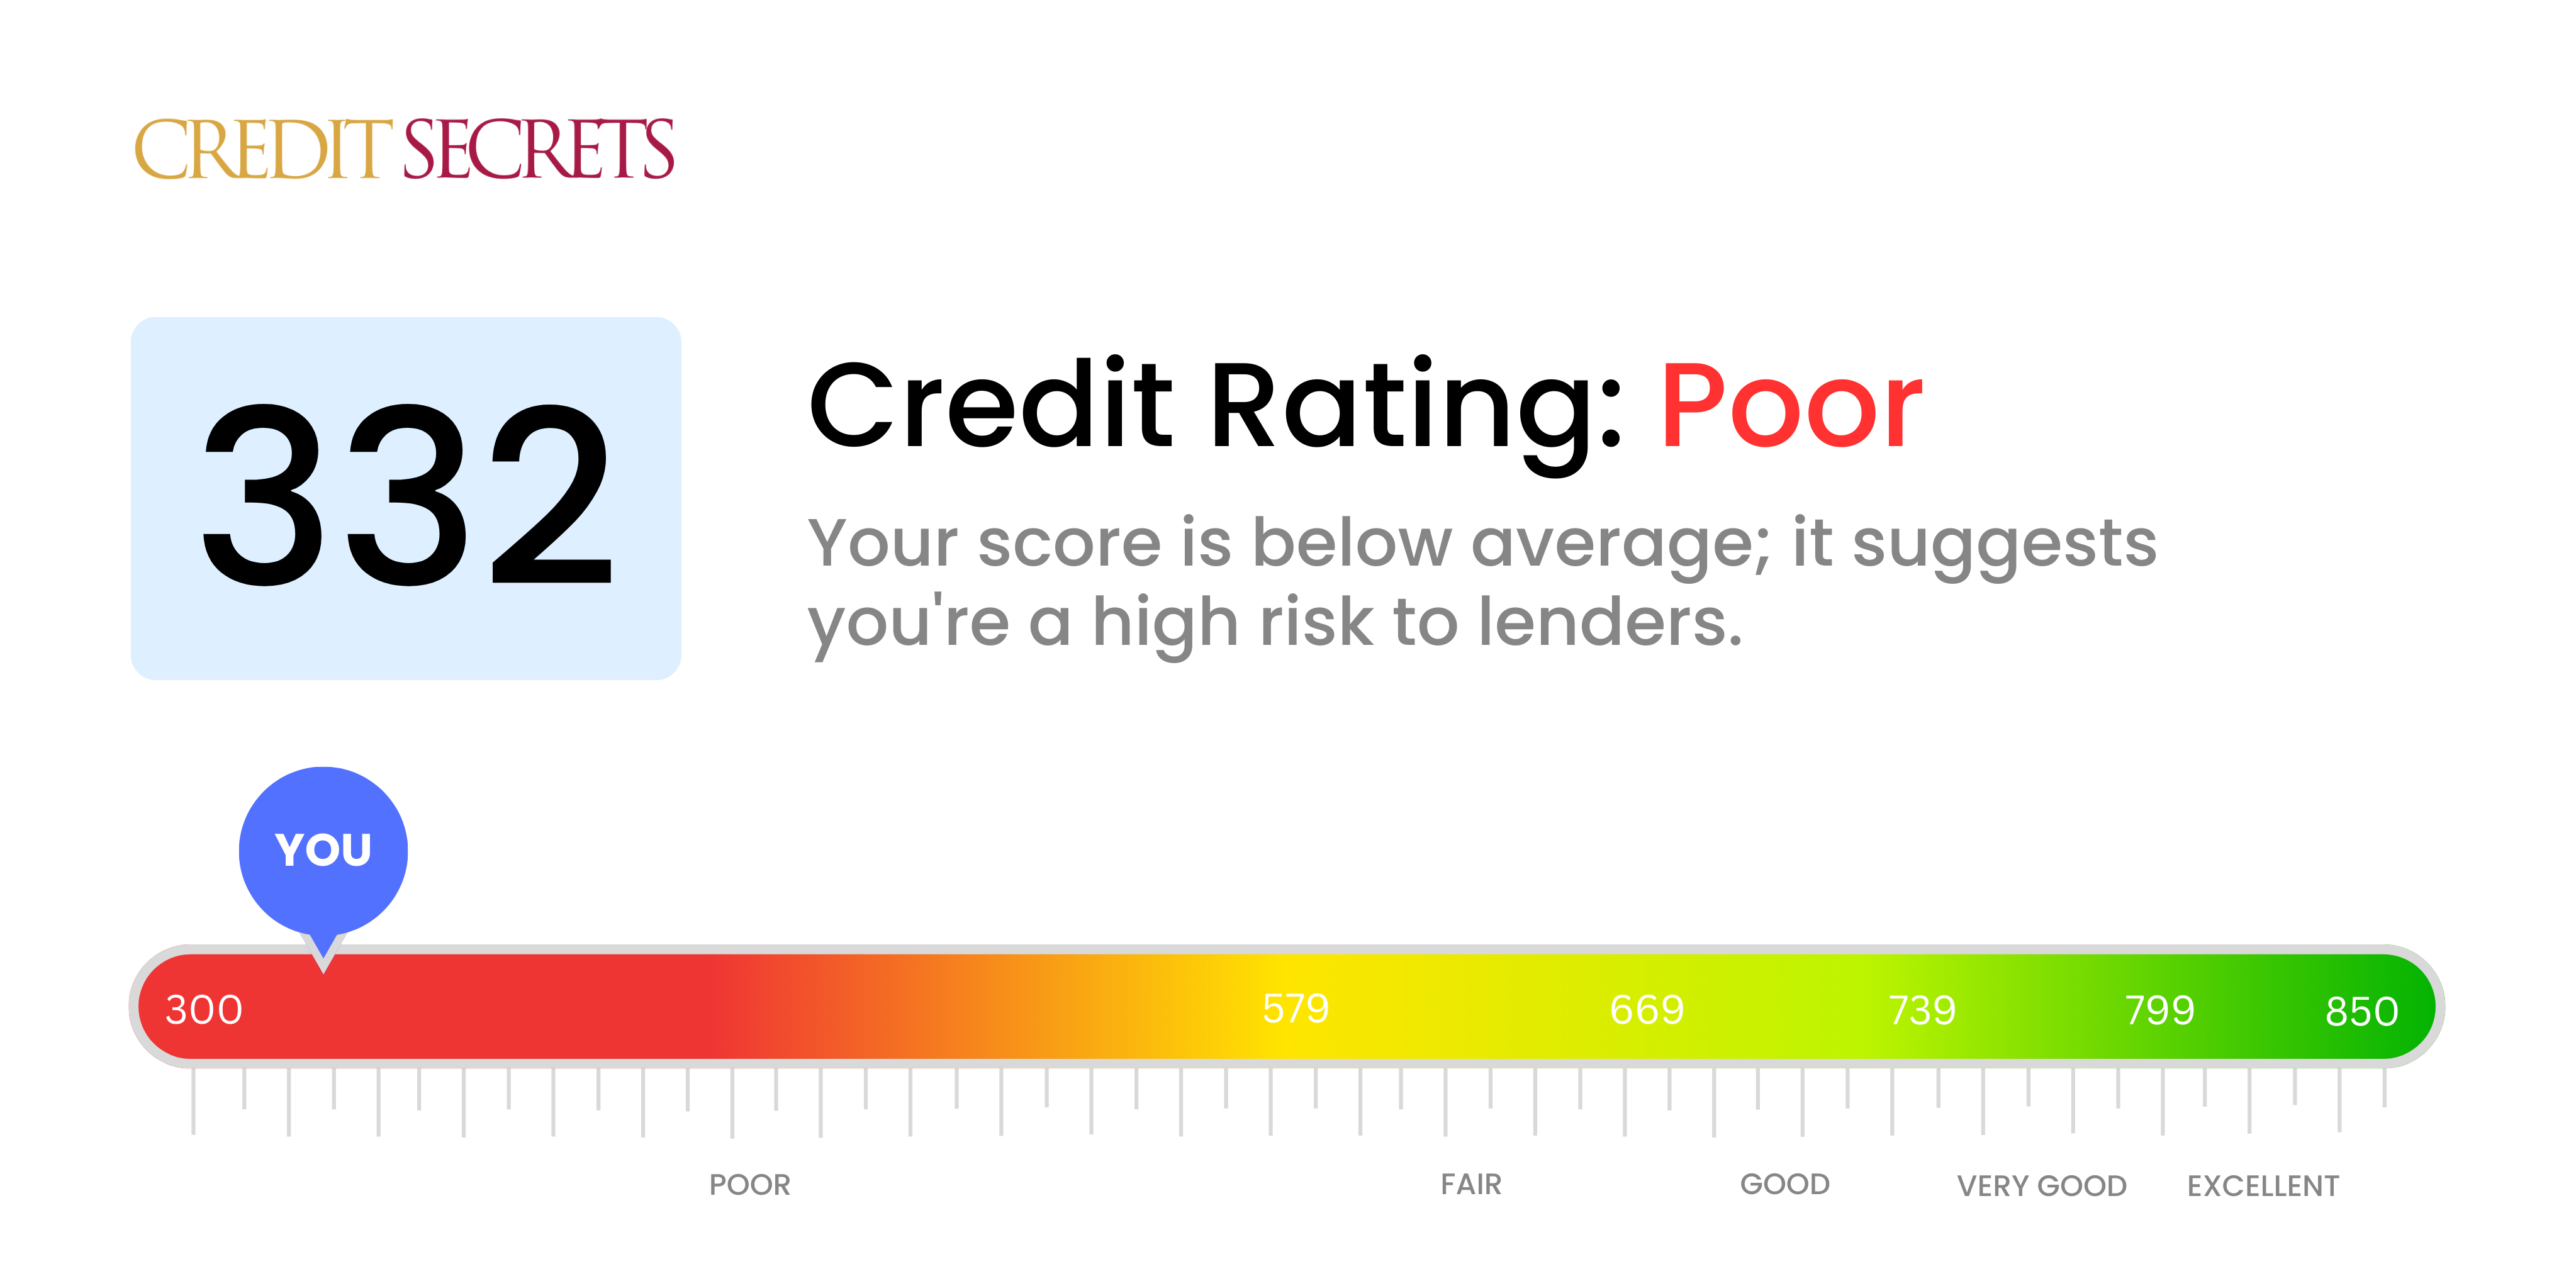 Is 332 a good credit score?